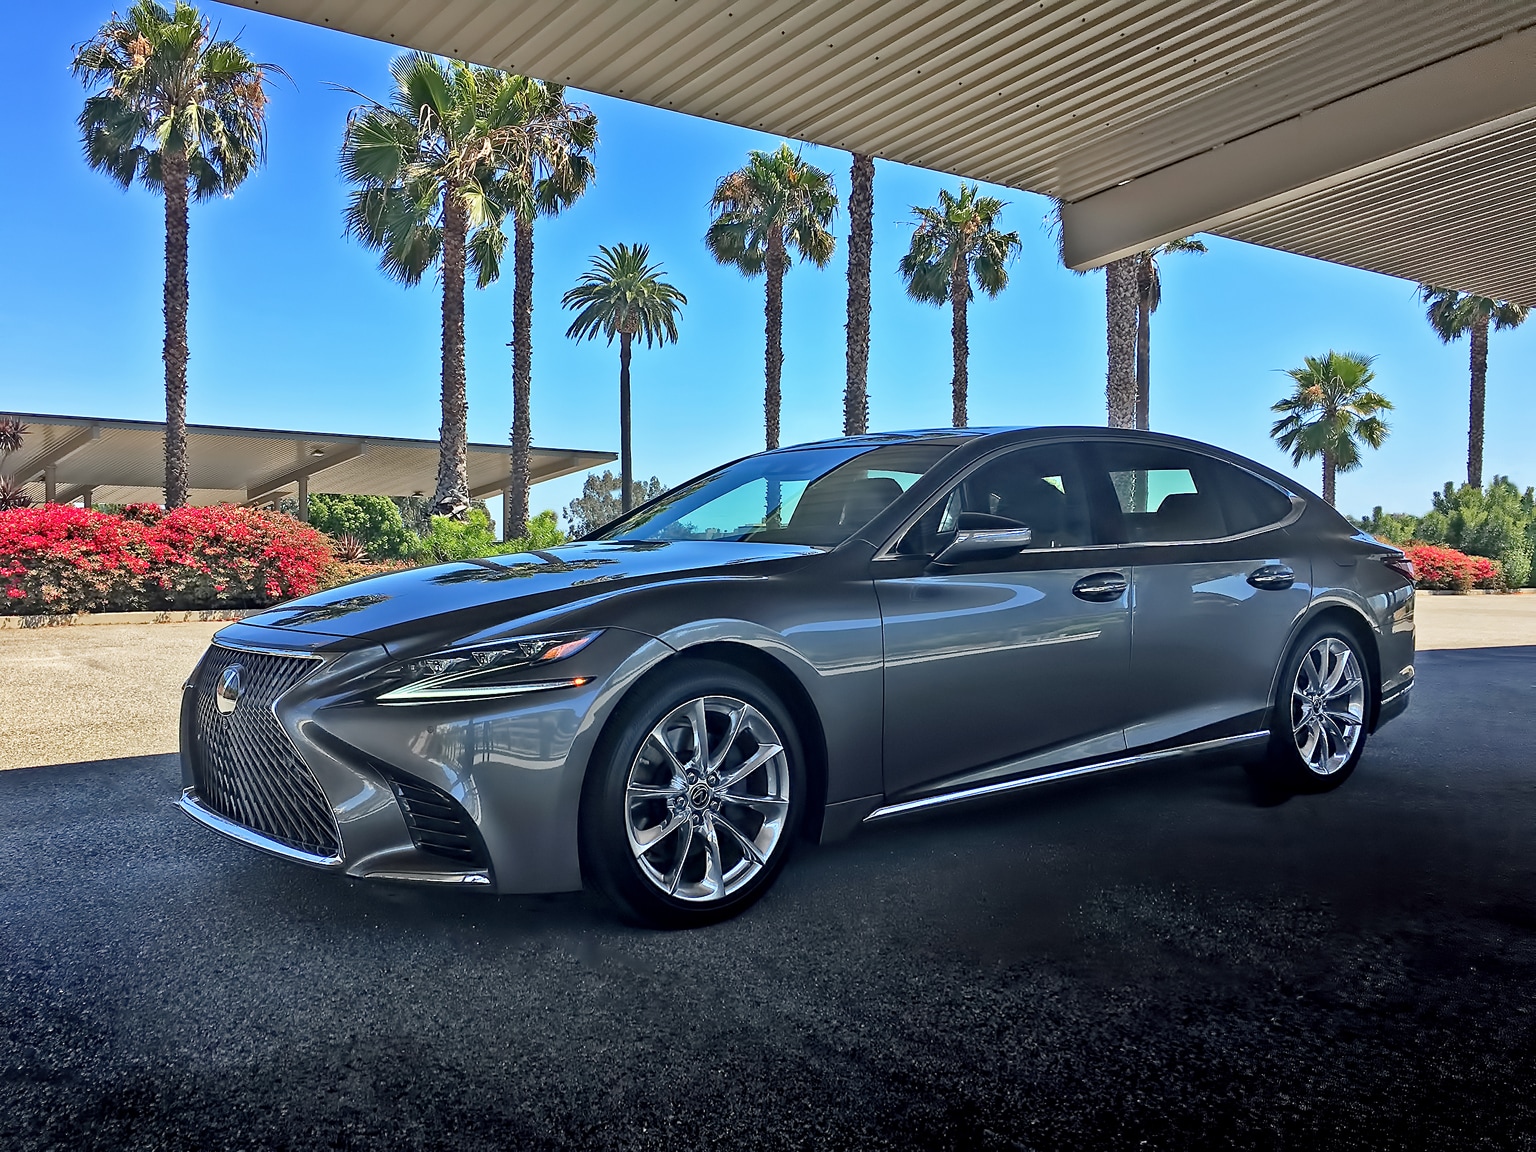 The 2019 Lexus LS500 Is a Boldly Chiseled Success